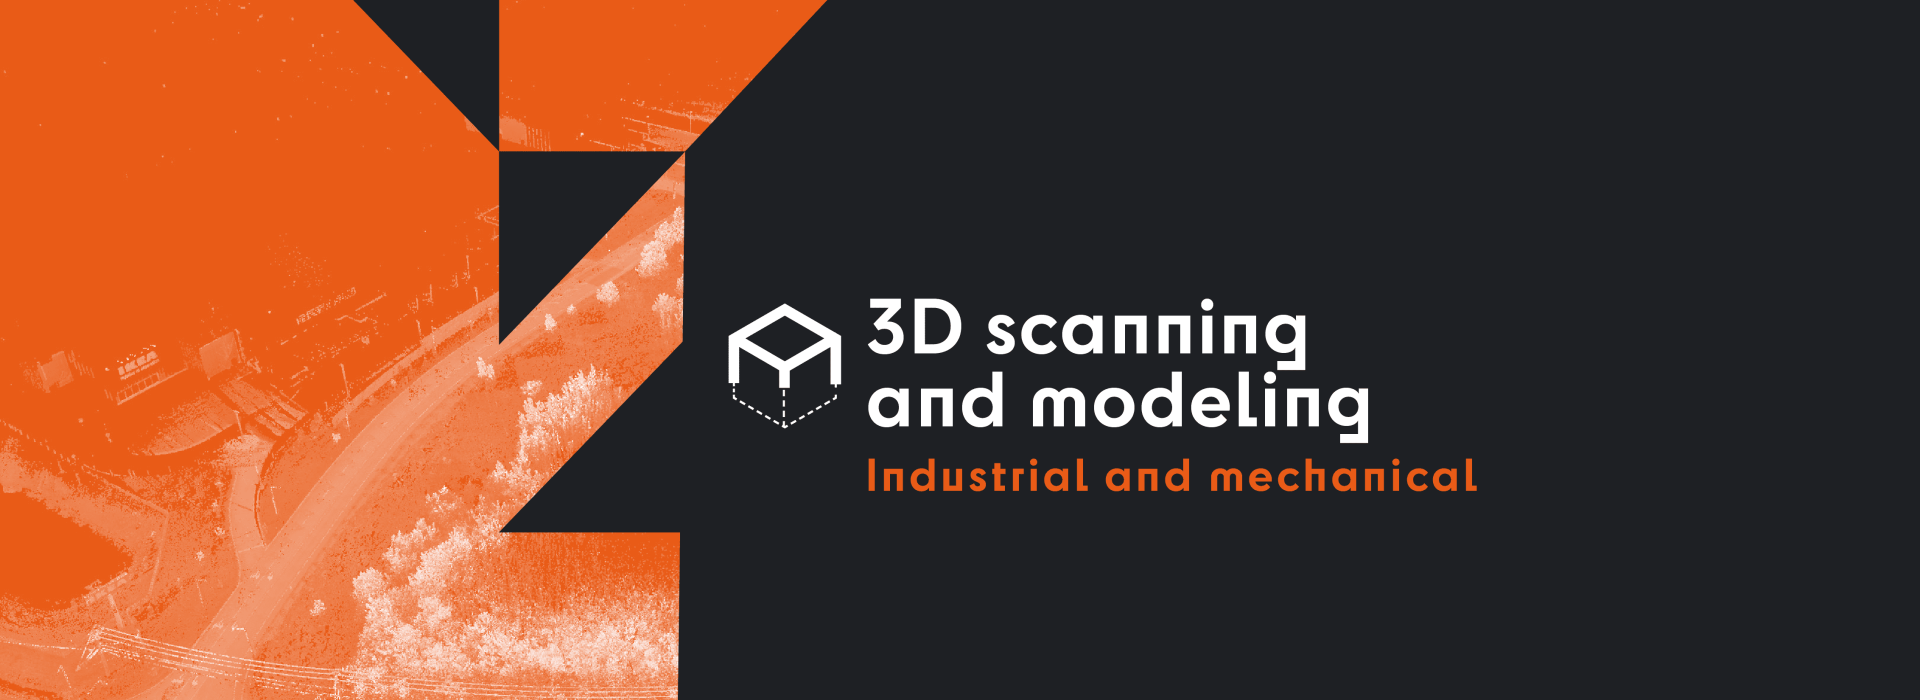 ANGLAIS_WebBanner_3D scanning -Indust and mech